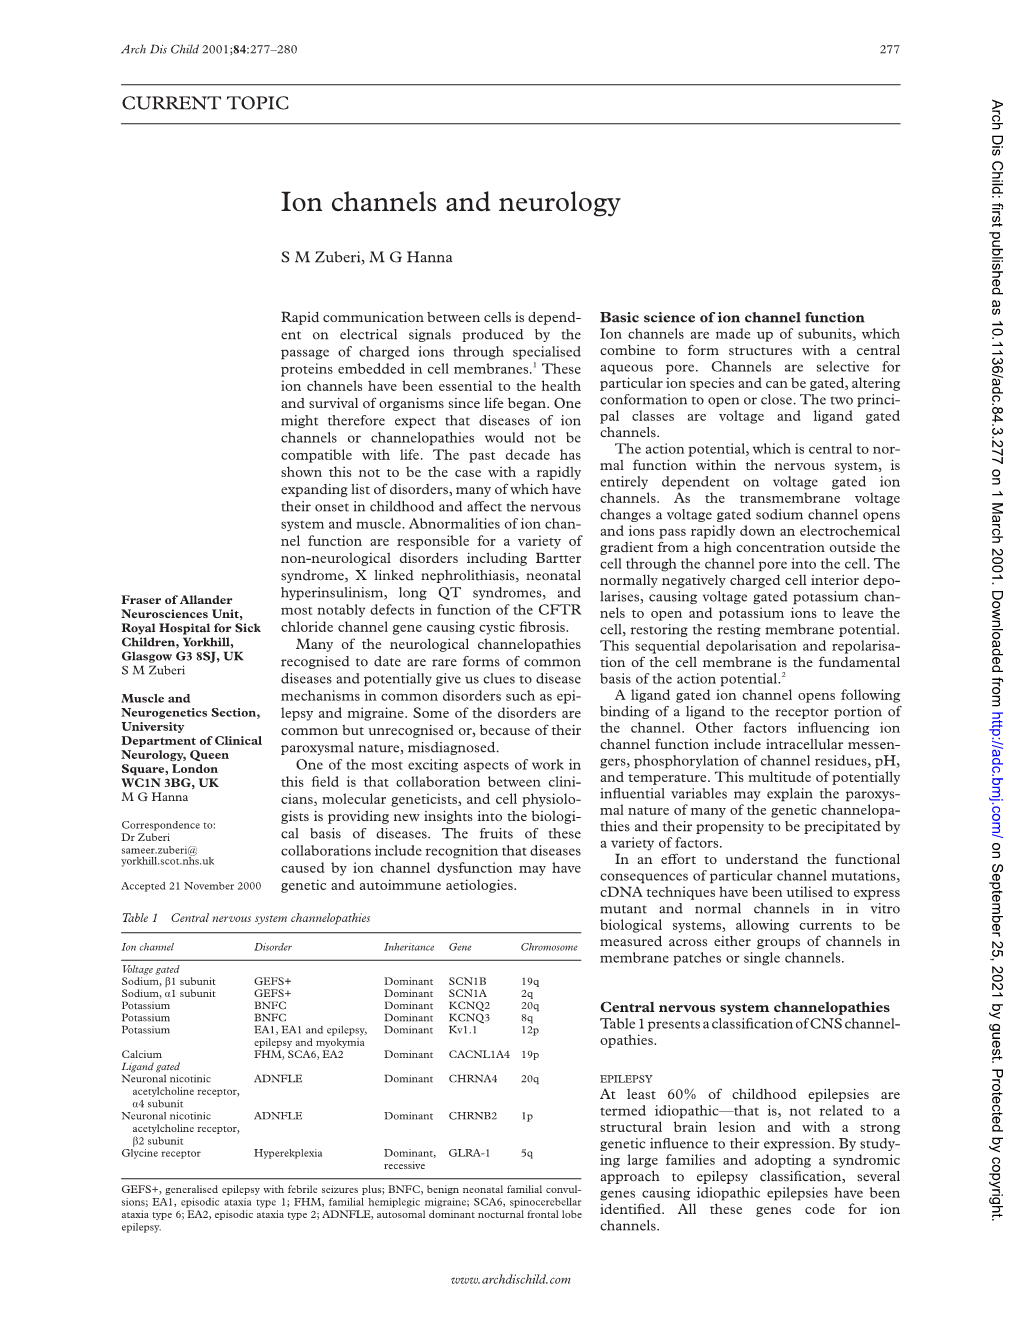 Ion Channels and Neurology